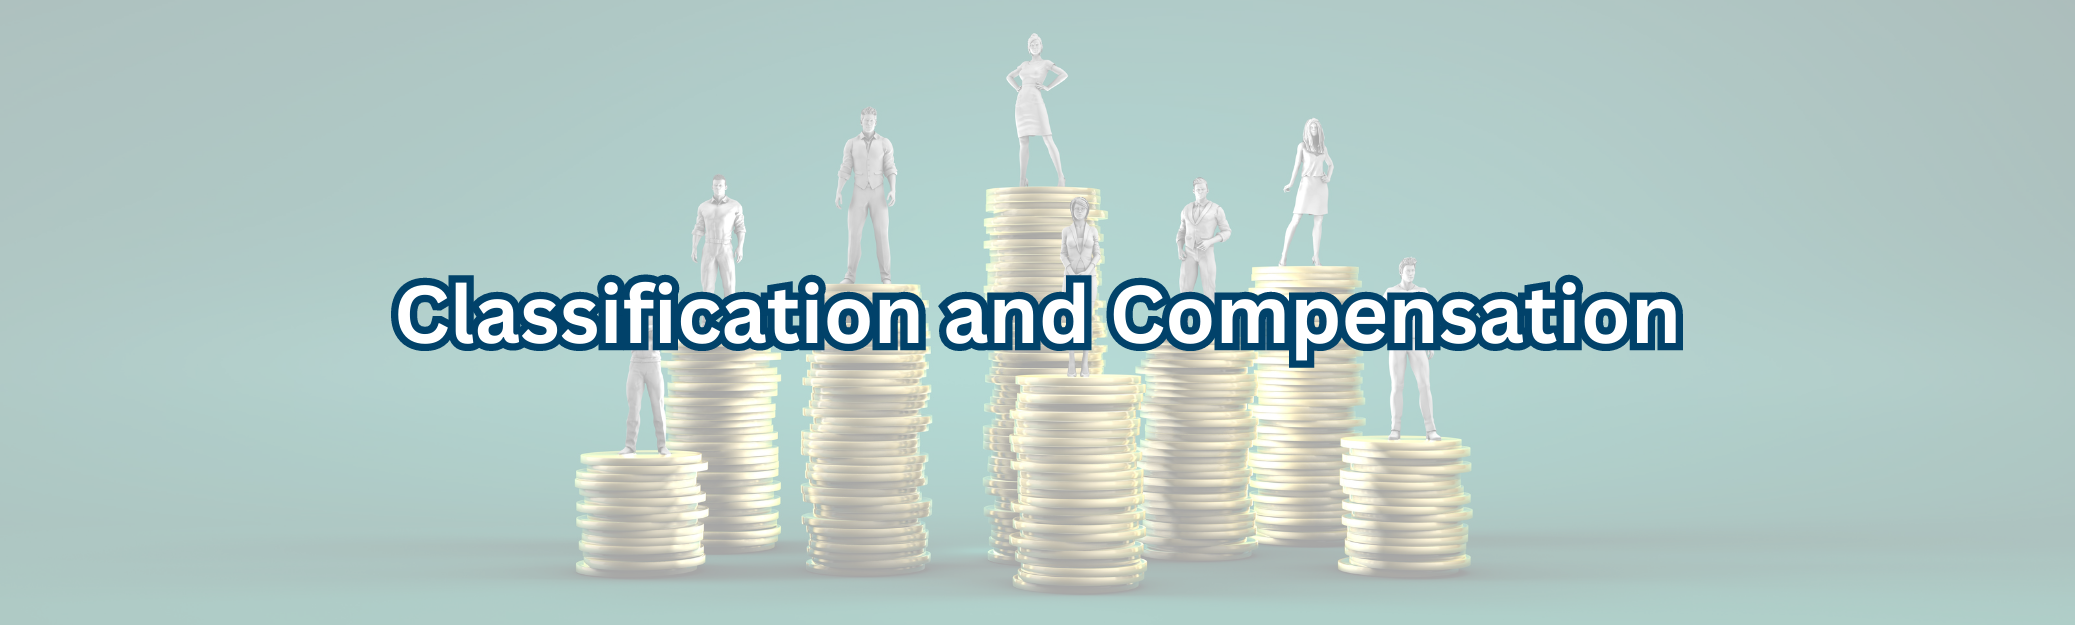 classification and compensation banner